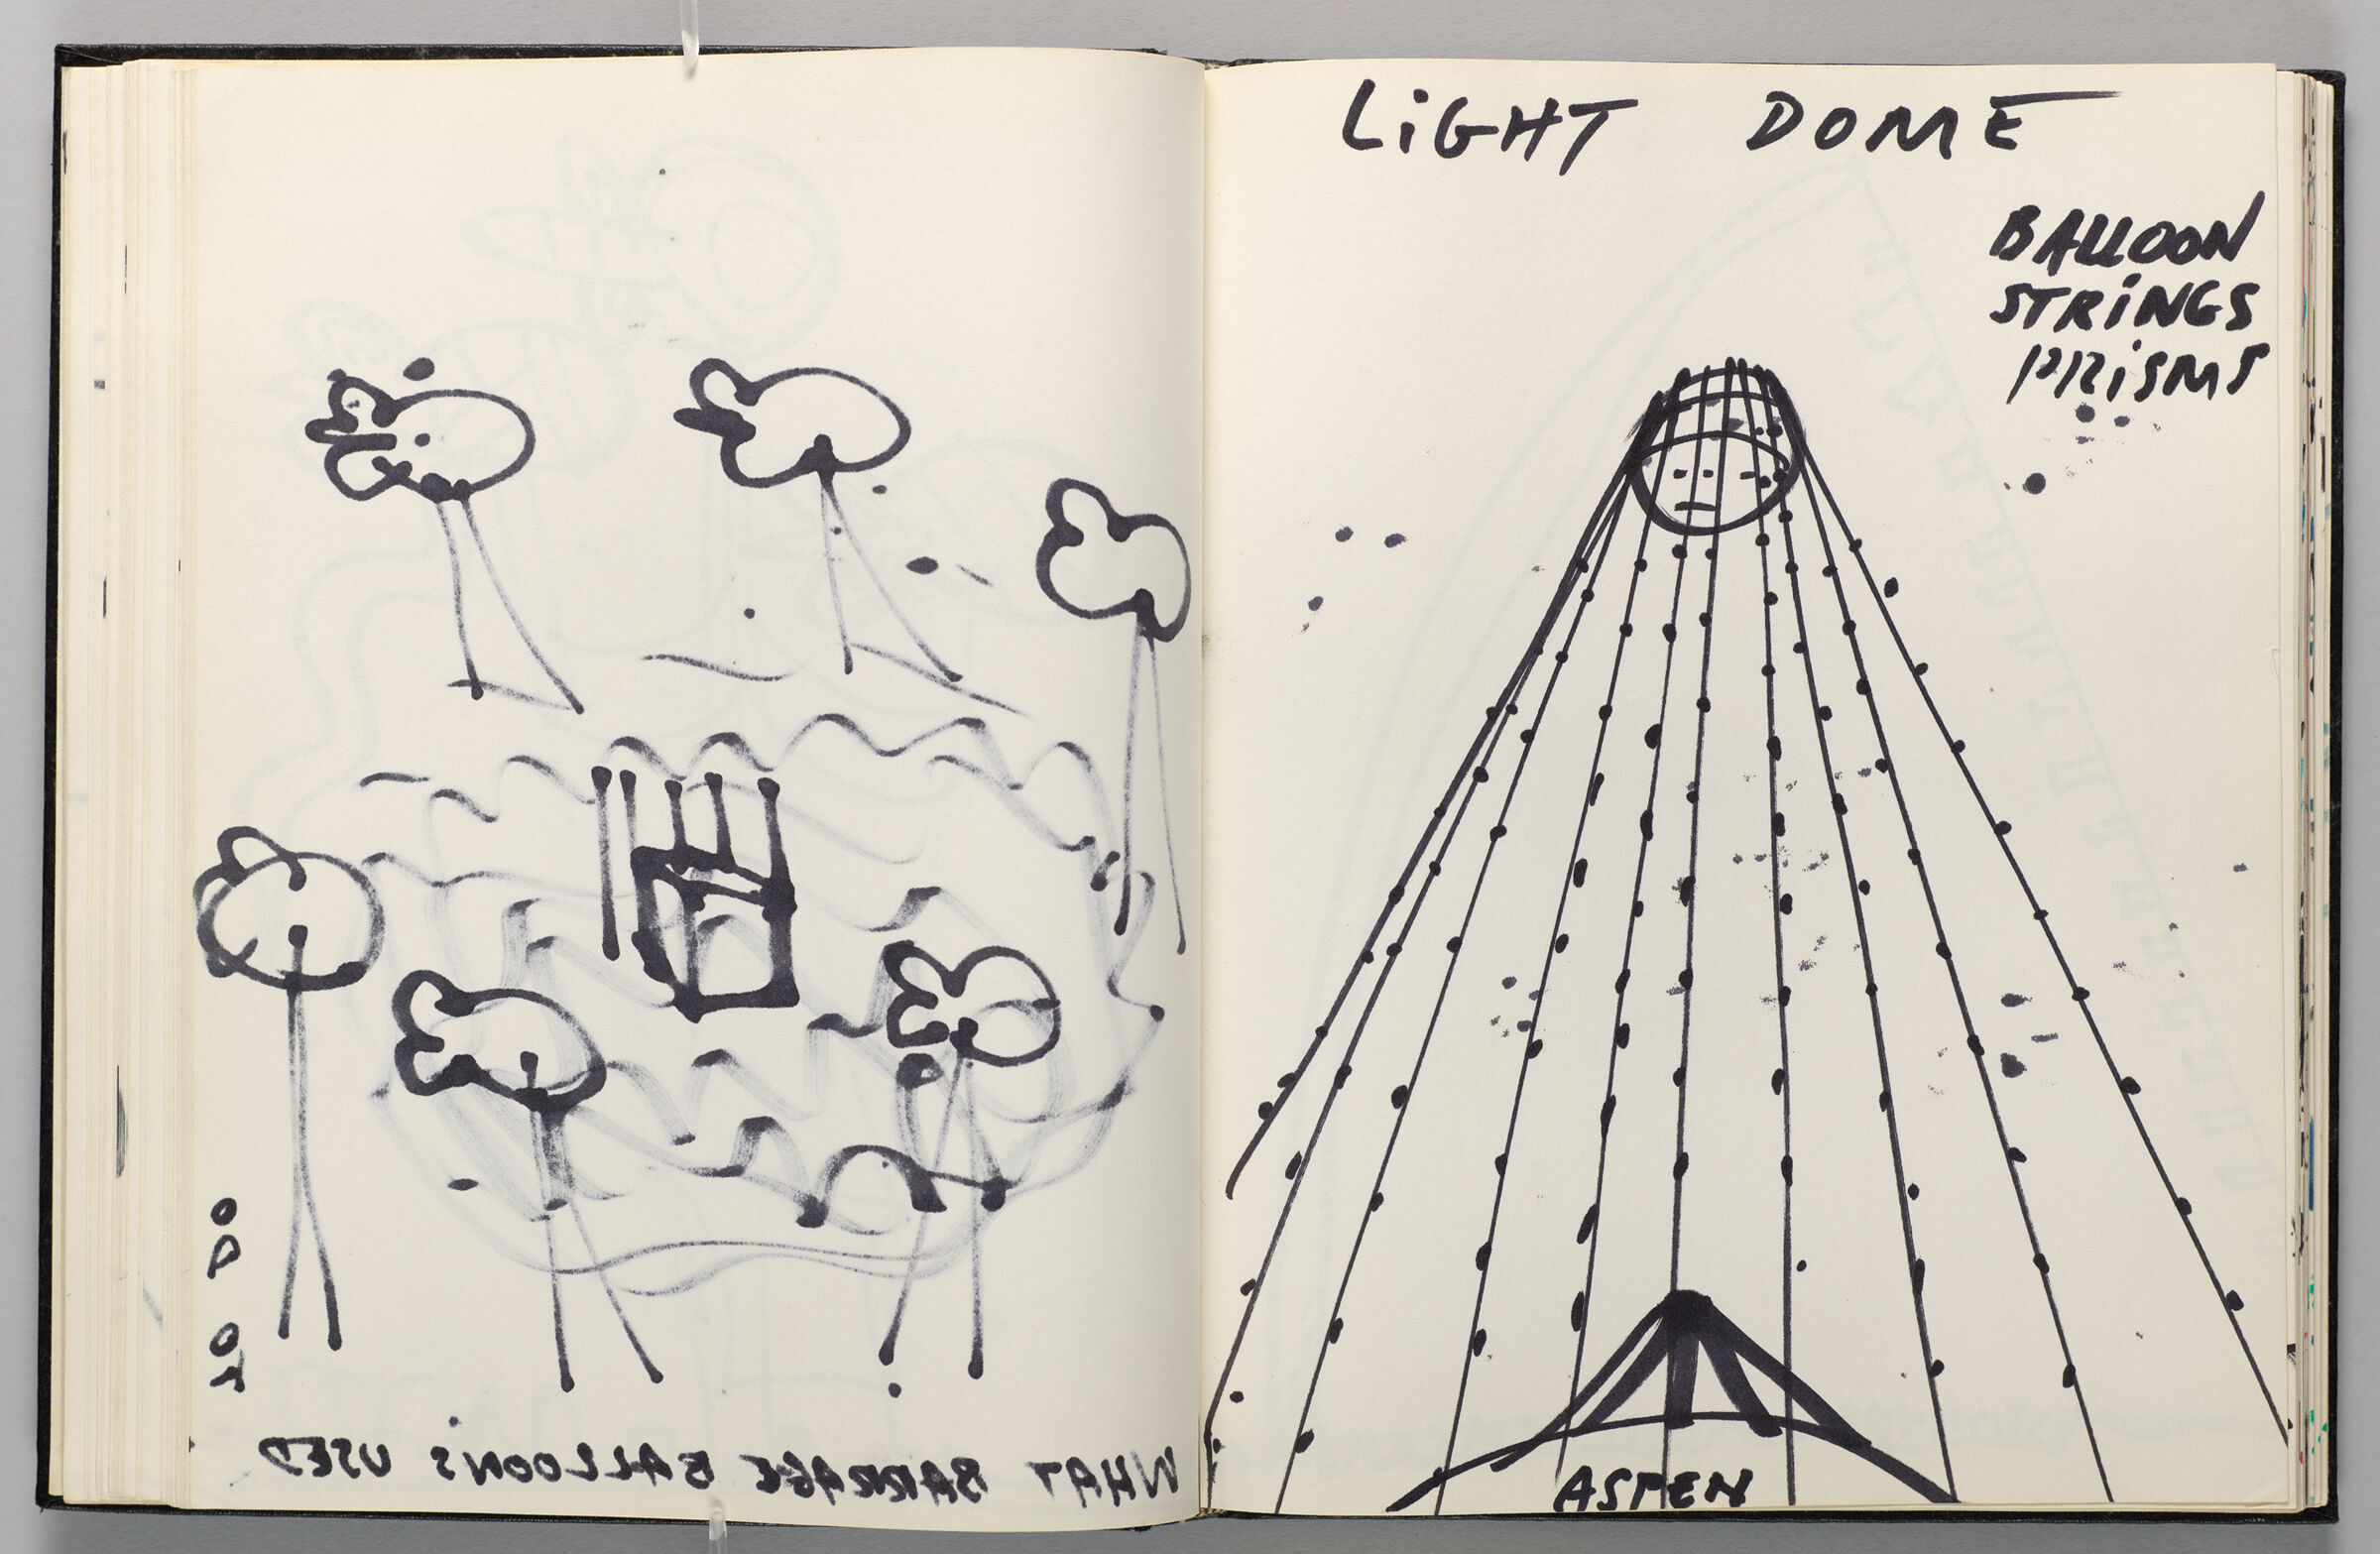 Untitled (Bleed-Through Of Previous Page, Left Page); Untitled (Light Dome For Aspen, Right Page)